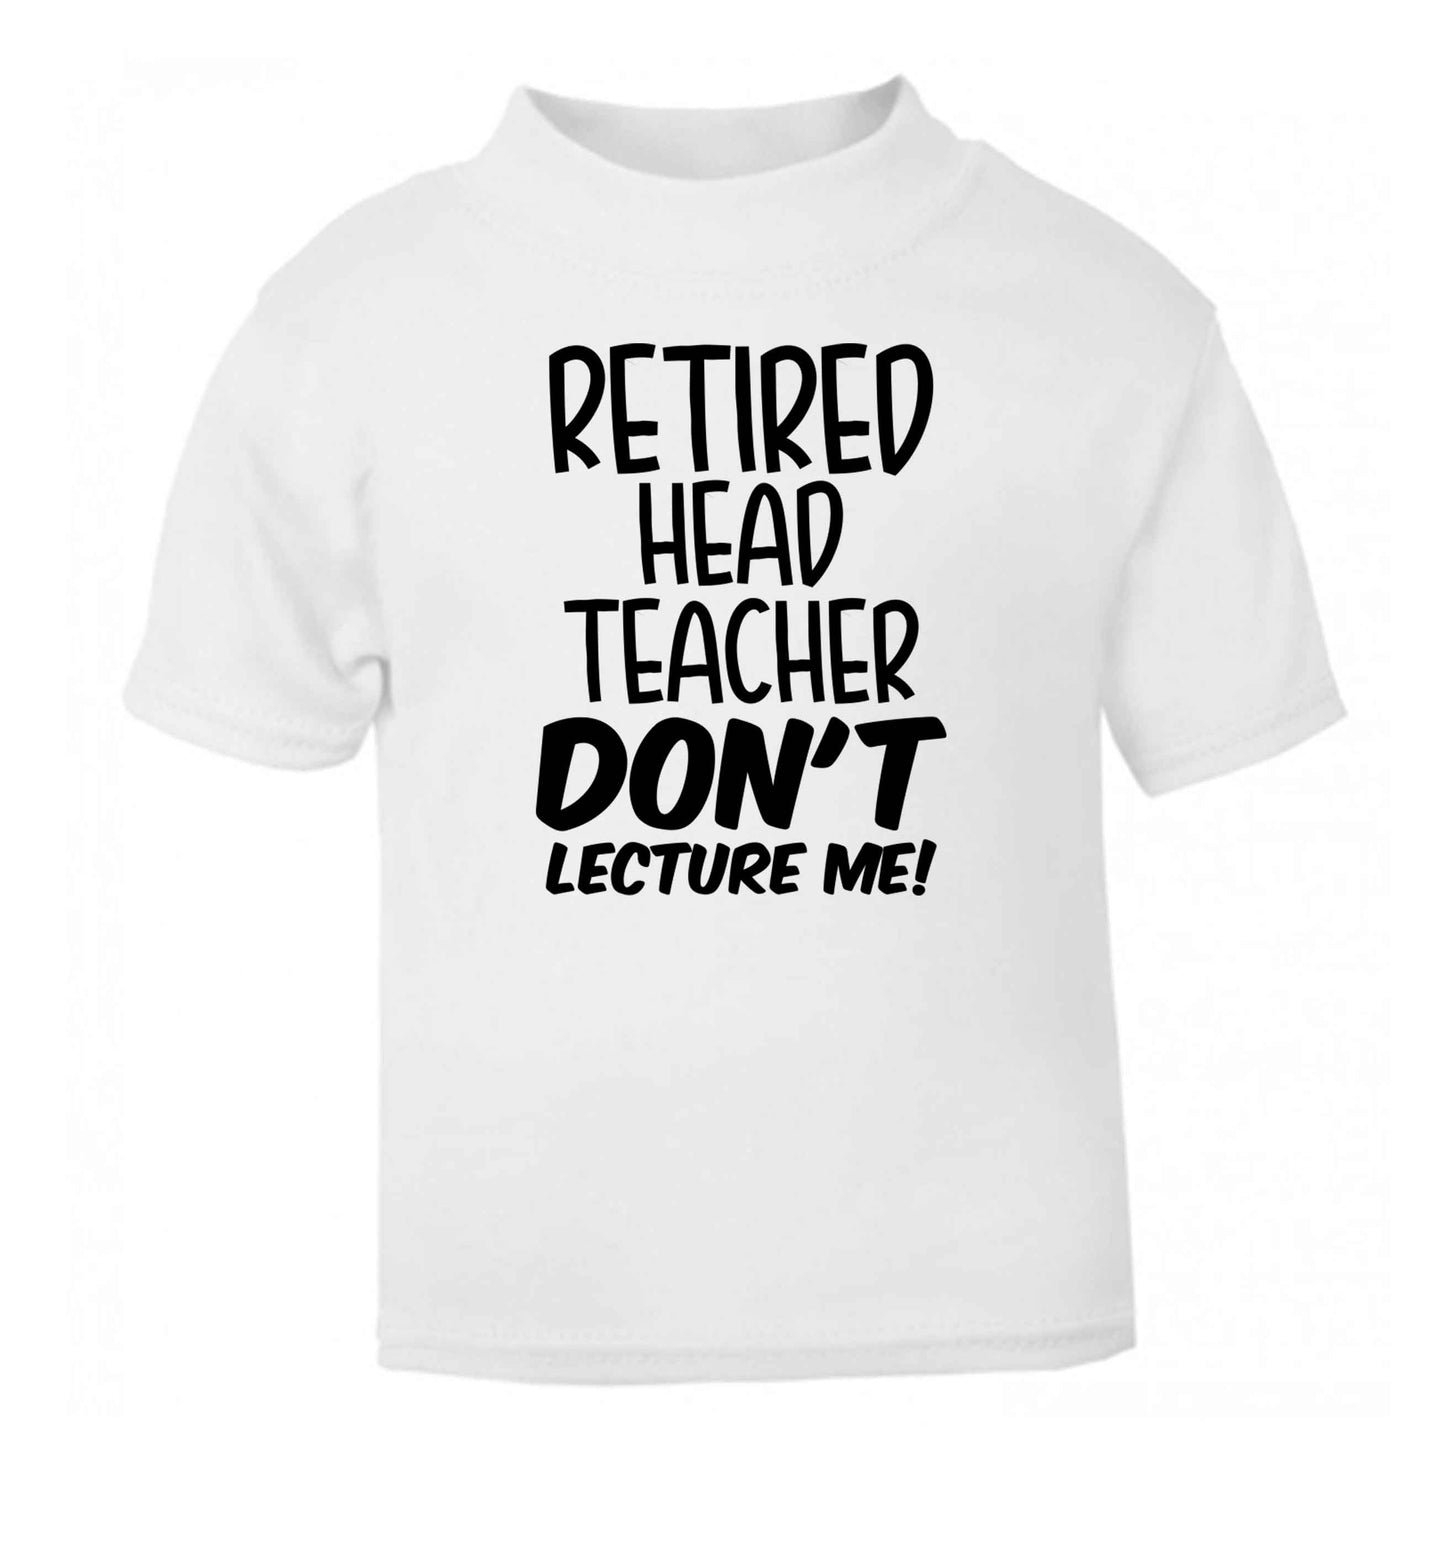 Retired head teacher don't lecture me! white Baby Toddler Tshirt 2 Years